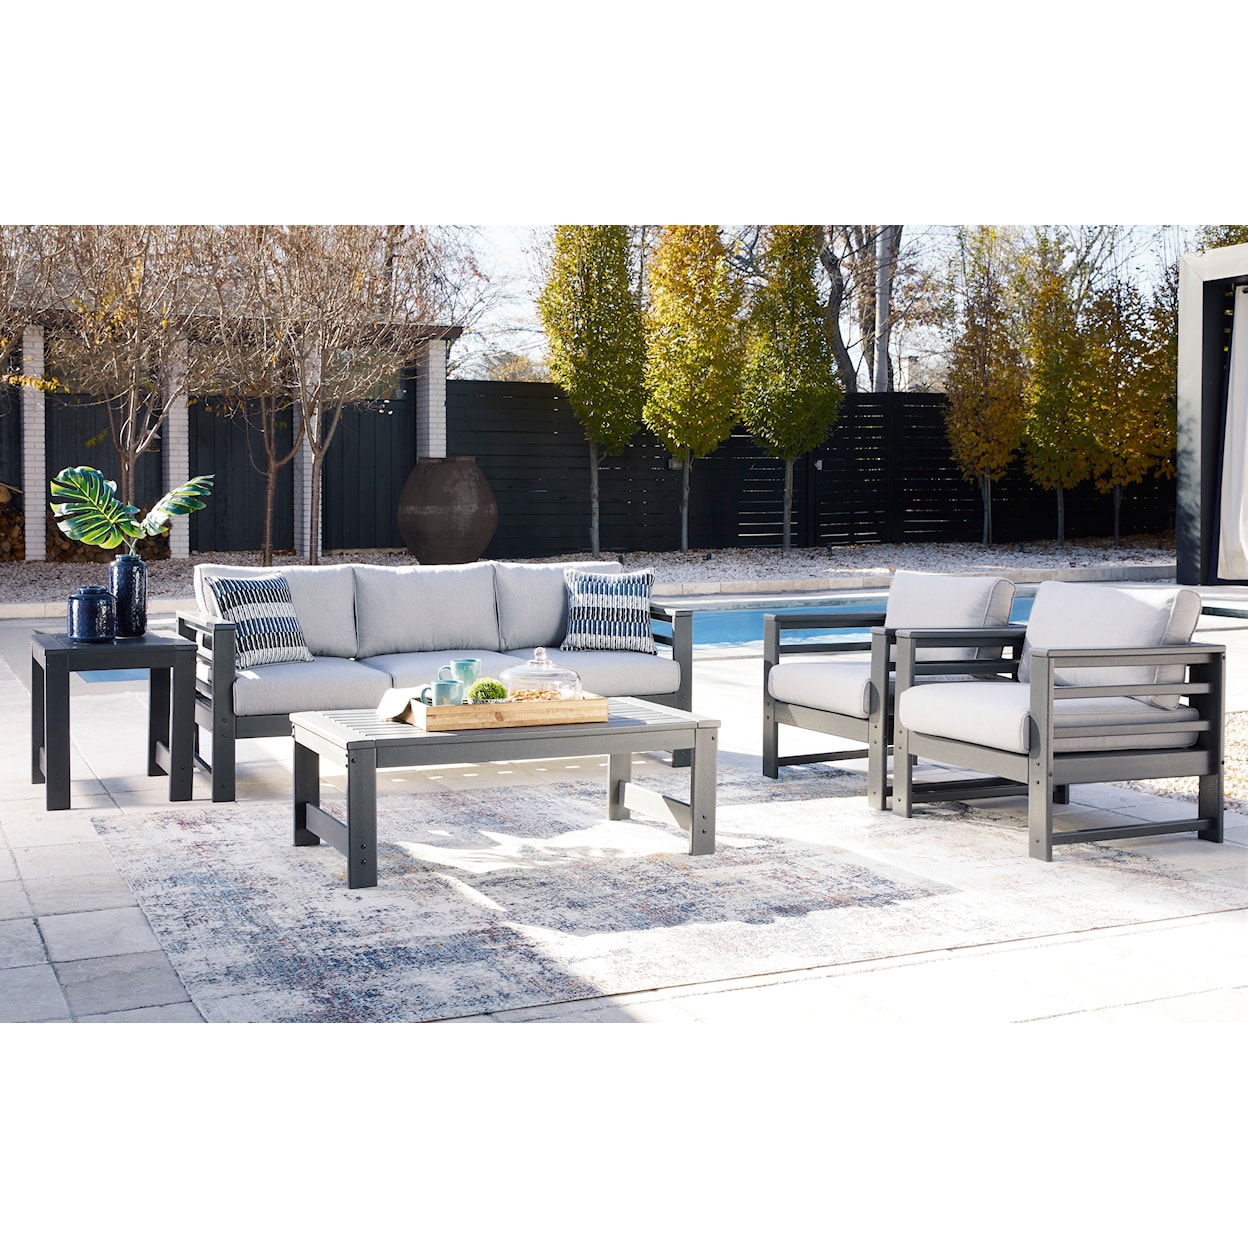 Benchcraft Amora Outdoor Coffee Table